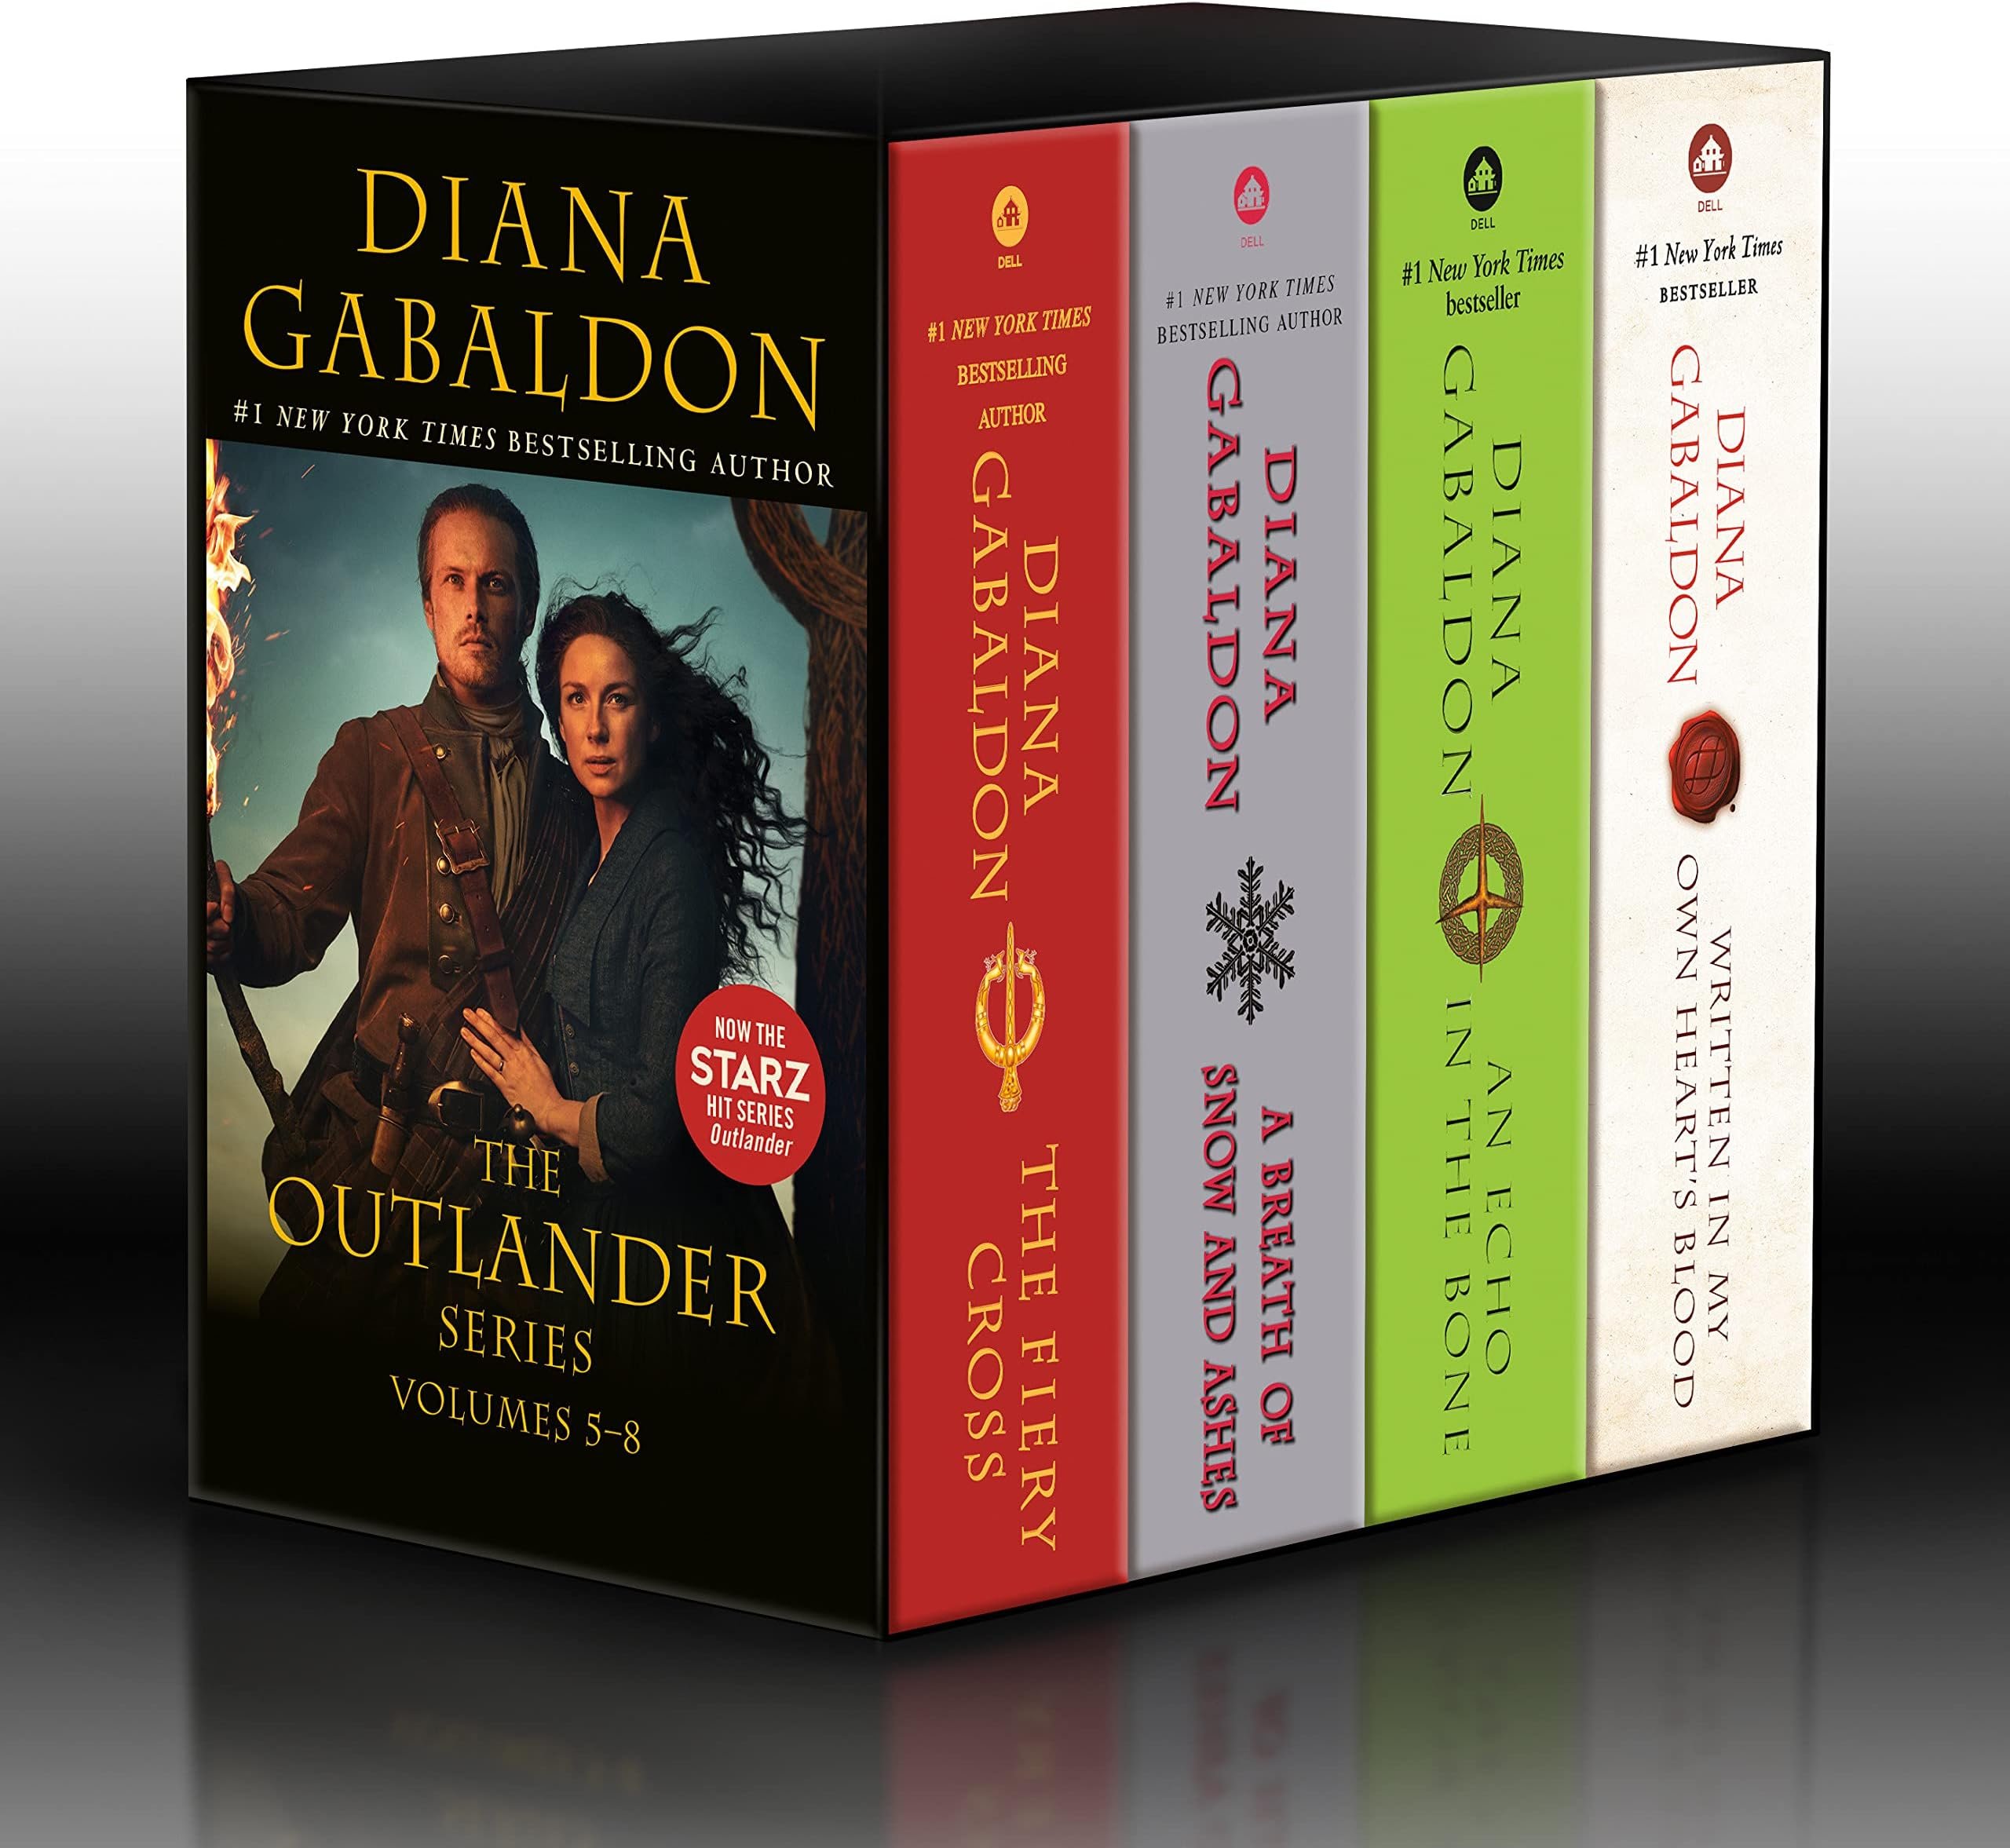 Outlander Volumes 5-8 (4-Book Boxed Set): The Fiery Cross, A Breath of Snow and Ashes, An Echo in the Bone, Written in My Own Heart's Blood (Outlander, 5-8) Cover